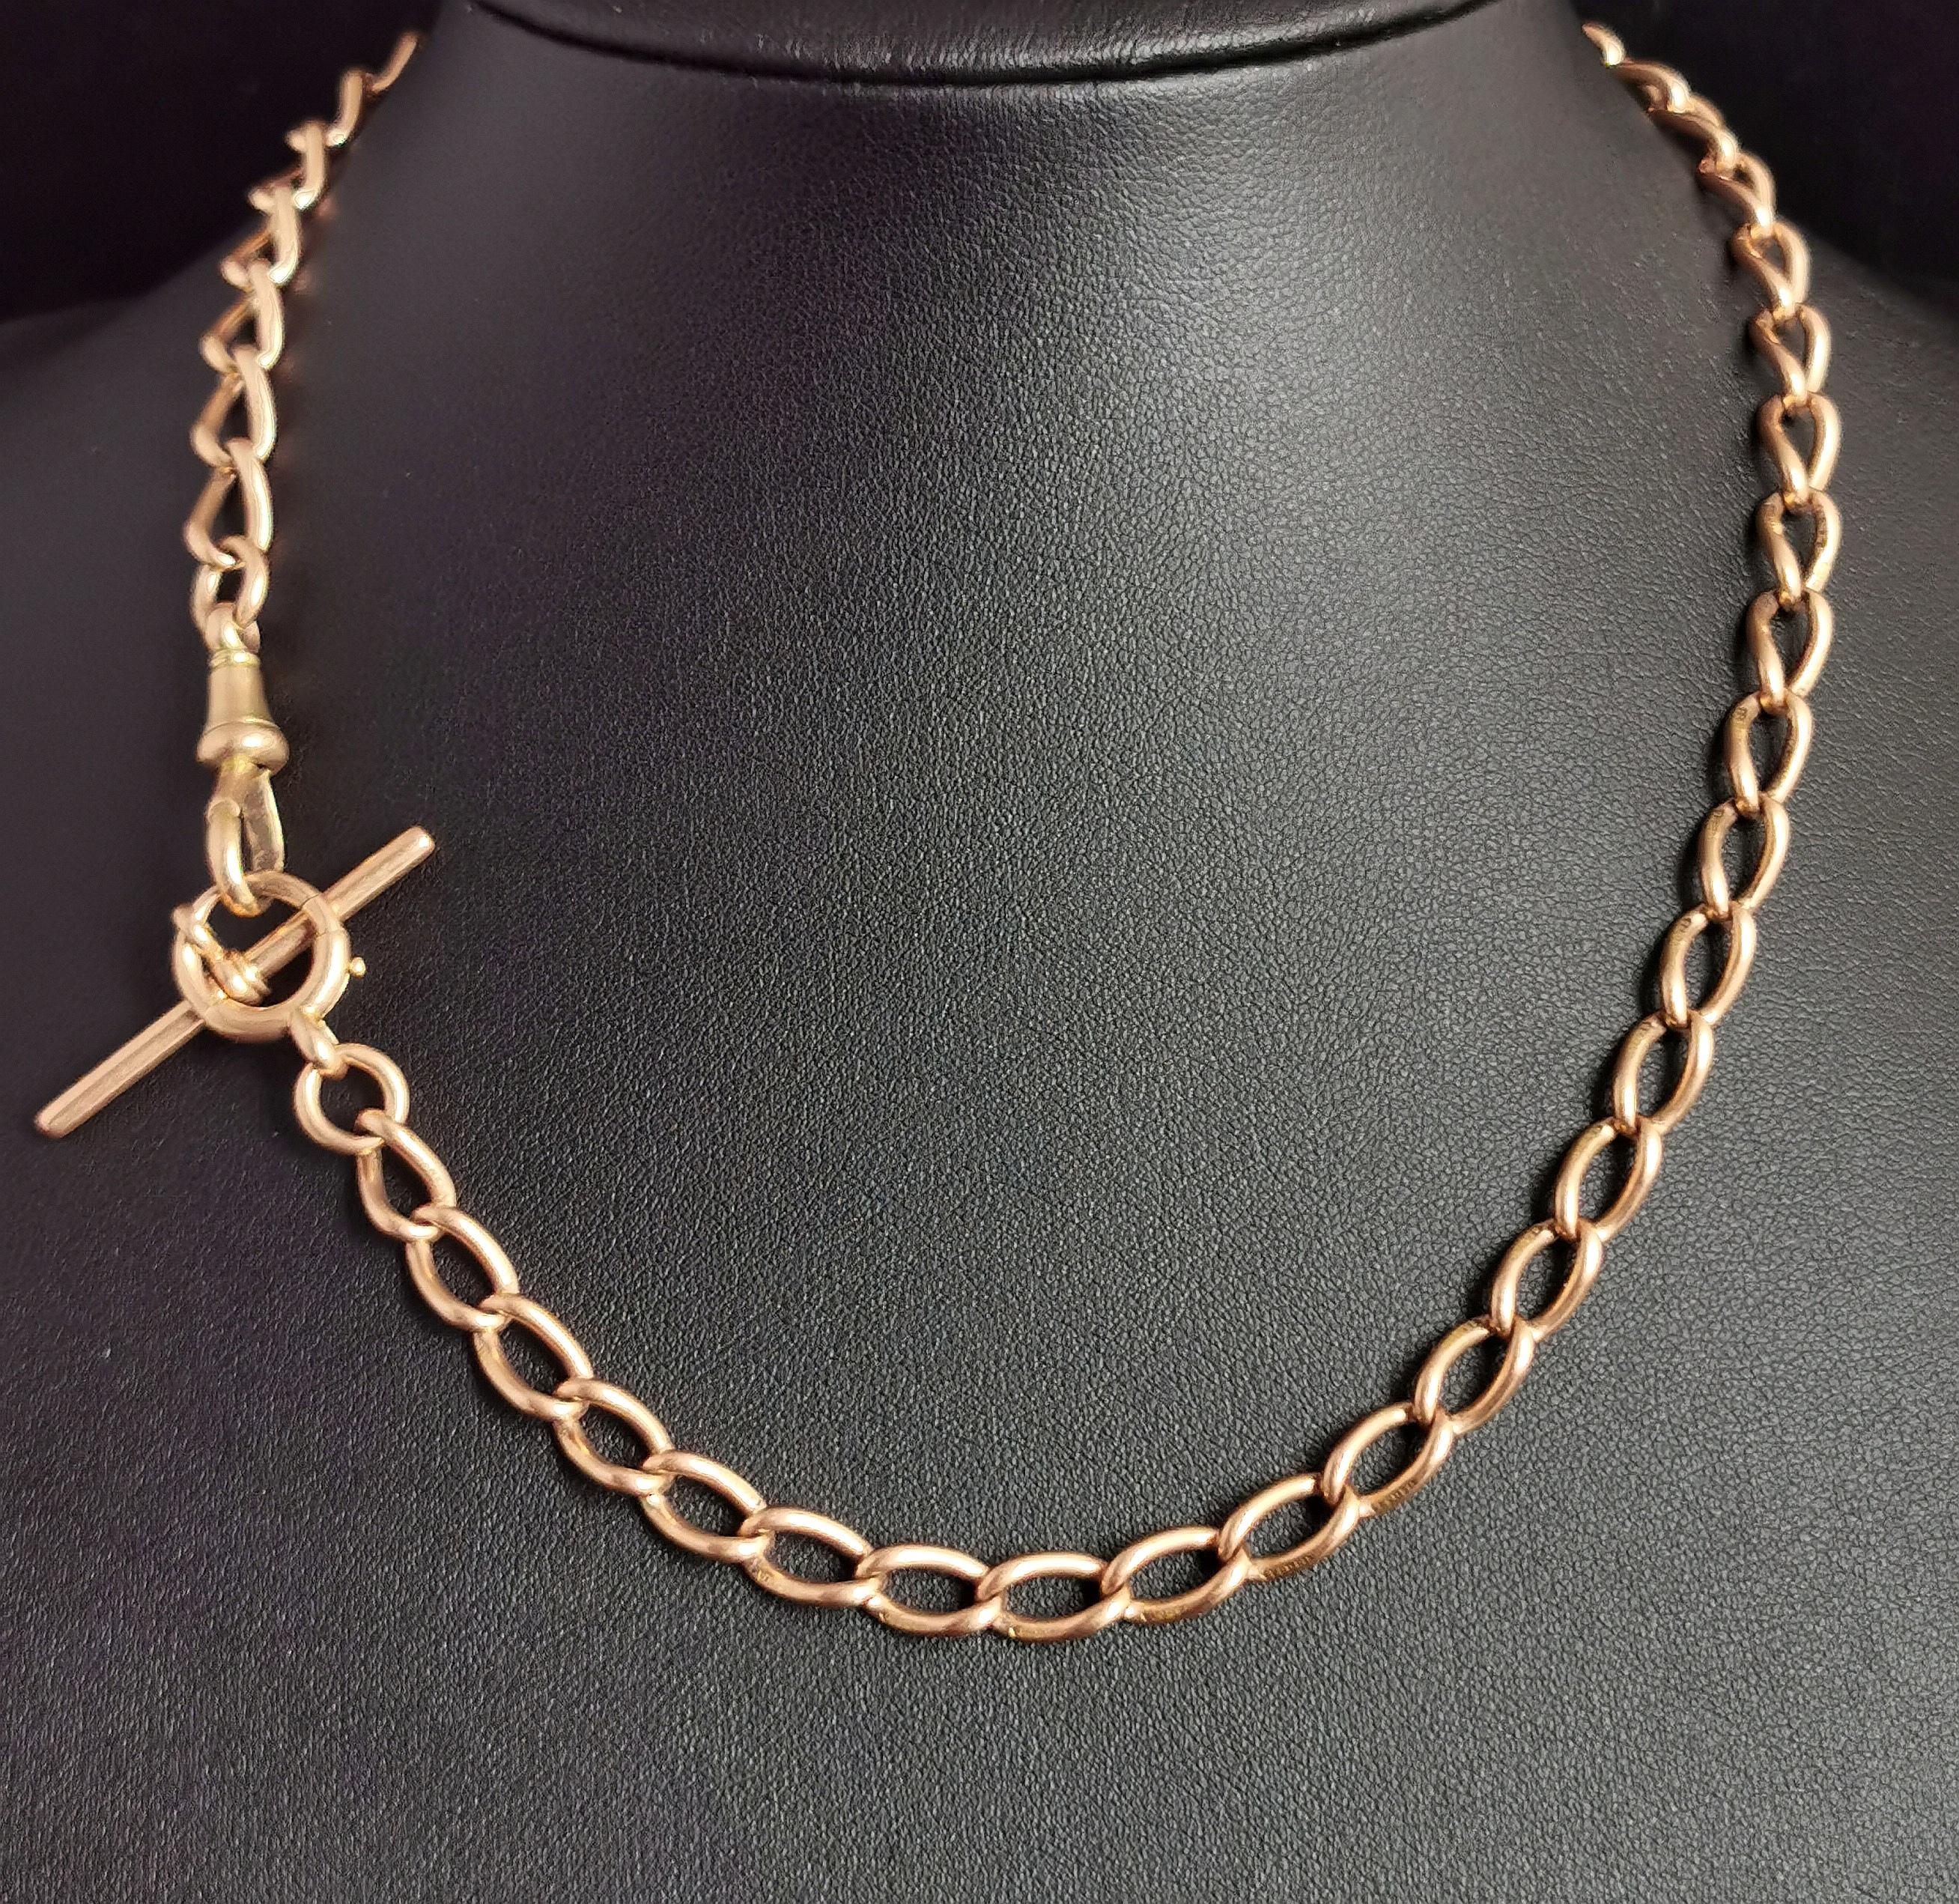 An impeccable antique, late Victorian era 15kt gold Albert chain.

A beautifully designed chain with elongated open curb links giving it a sleek design.

It is a longer length so could be worn as a necklace.

It has a gorgeous light rosey overtone